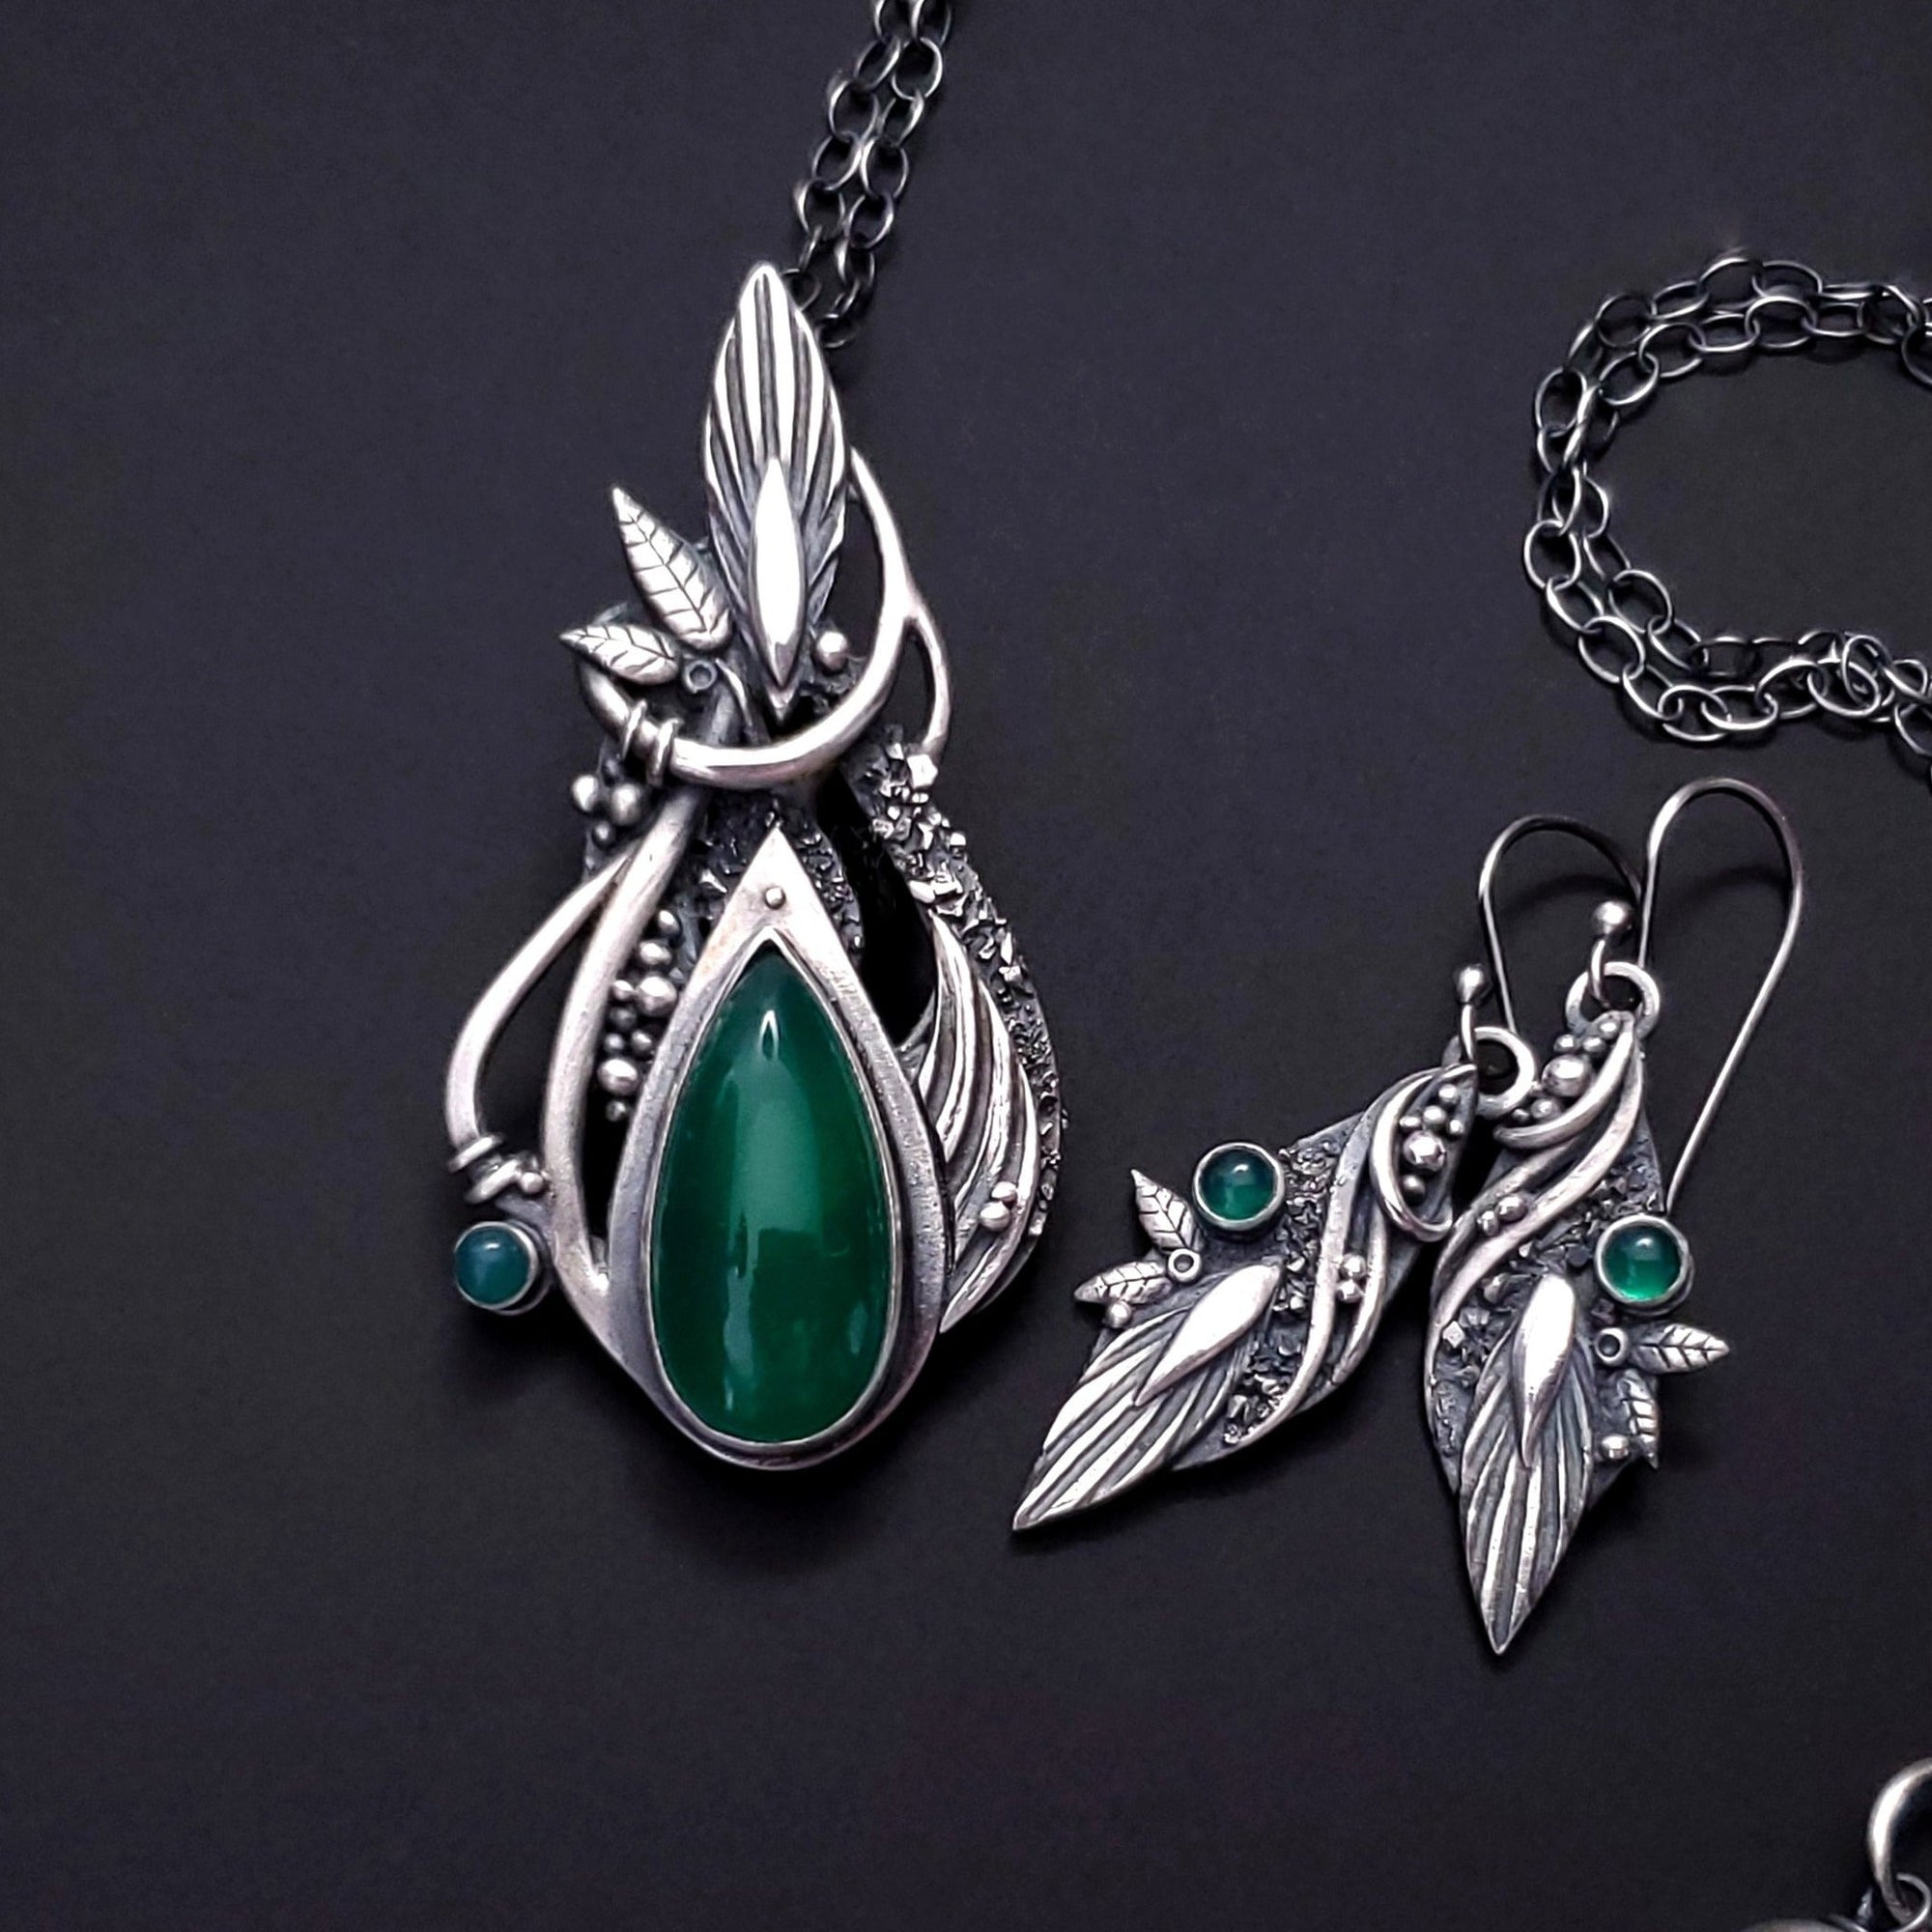 Serenity - Fine Silver Pendant / Complementing Earrings Set With Green Onyx